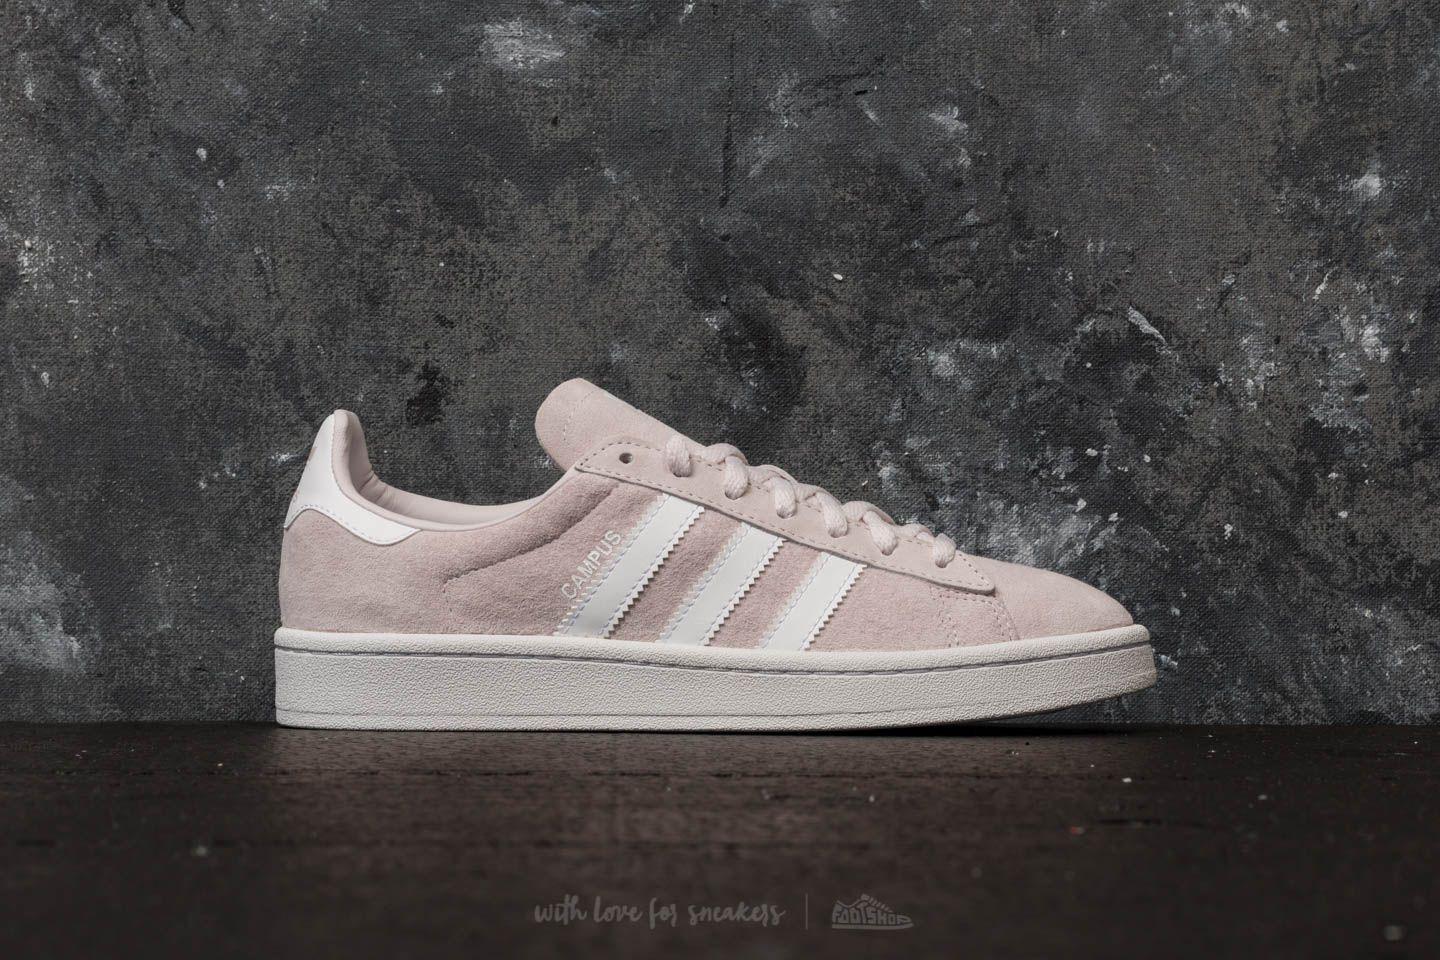 adidas Originals Suede Adidas Campus W Orchid Tint/ Ftw White/ Crystal White  - Lyst